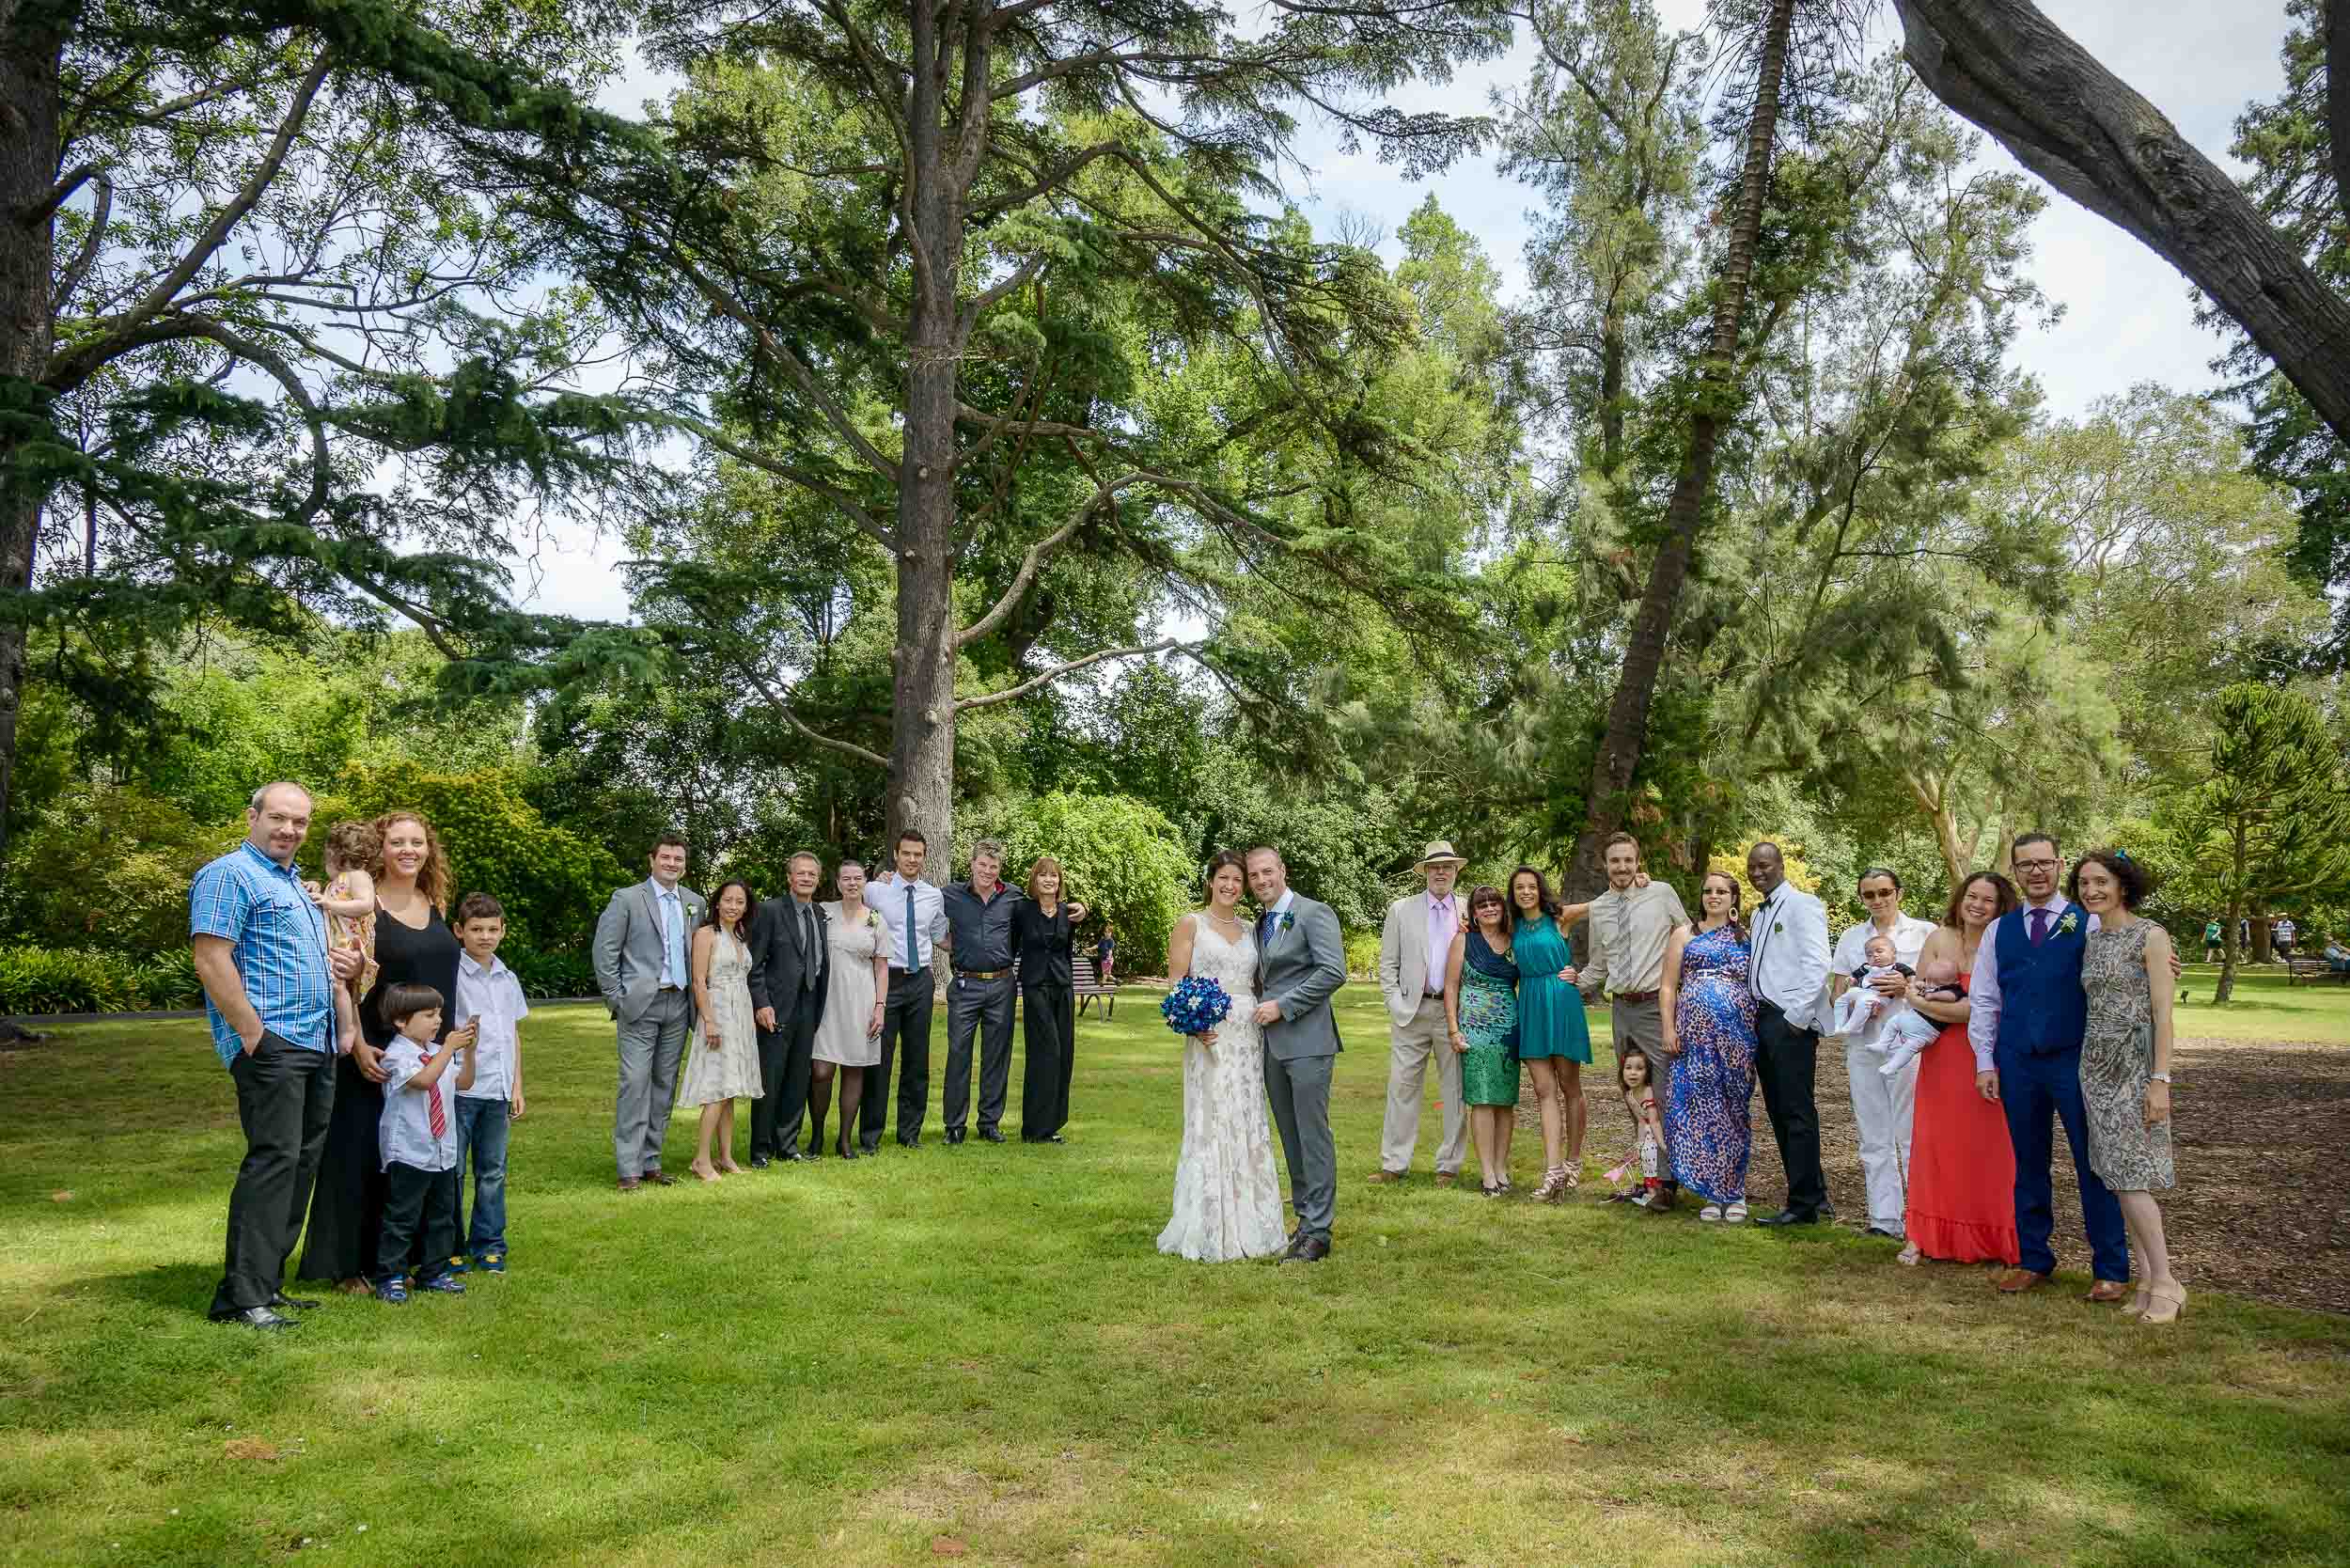 Group photo of bride and groom's extended families at an outdoor location.